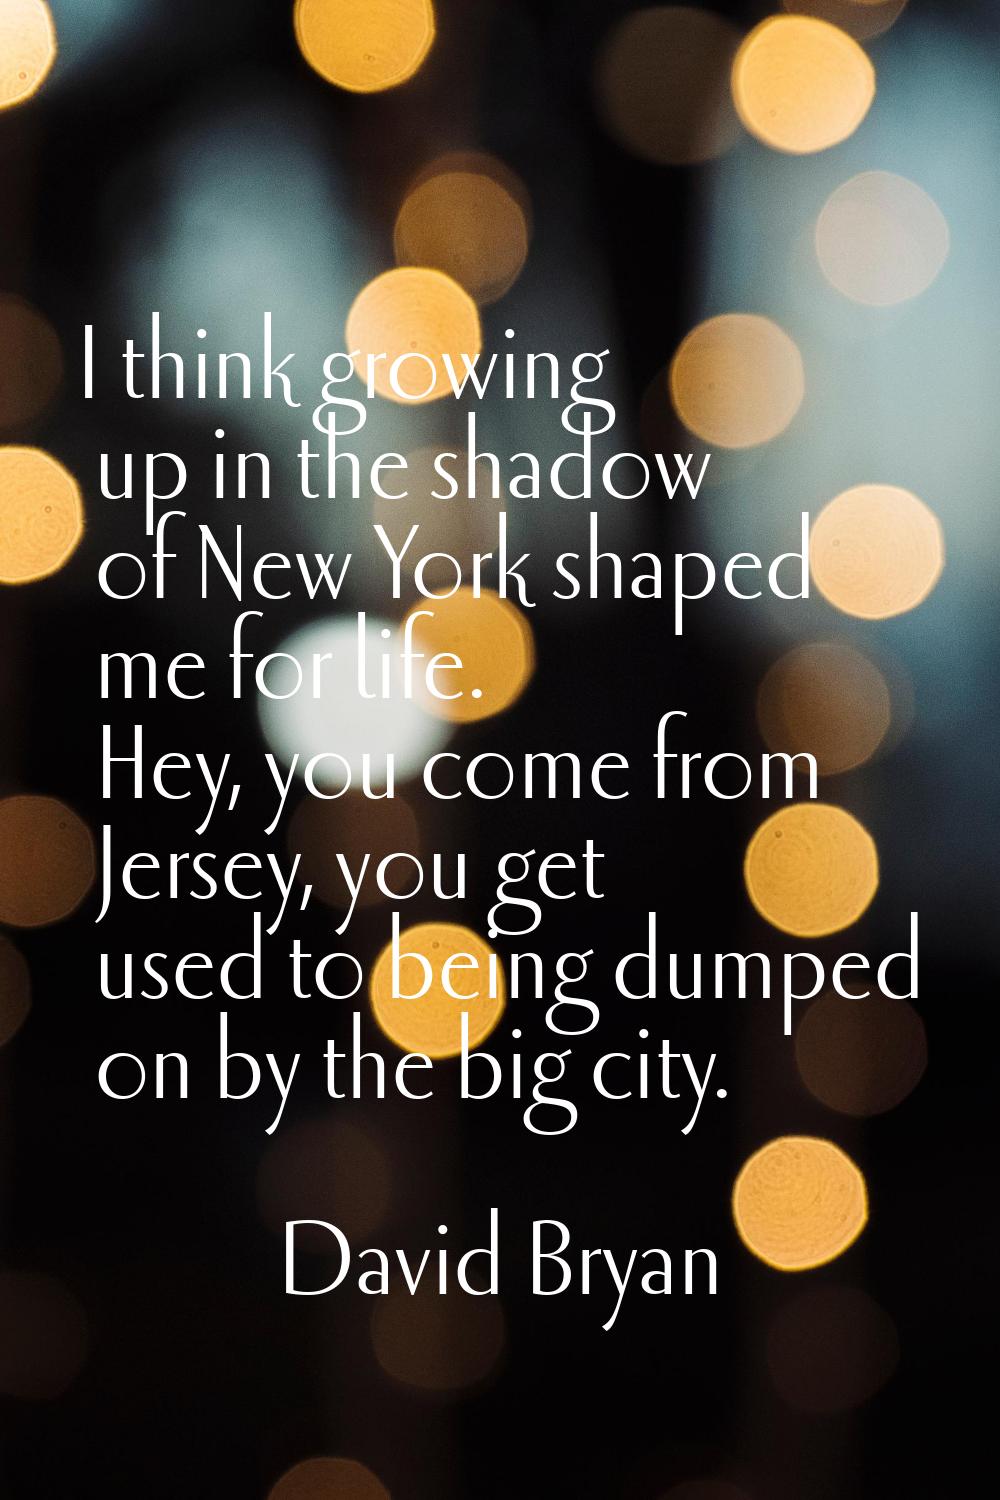 I think growing up in the shadow of New York shaped me for life. Hey, you come from Jersey, you get